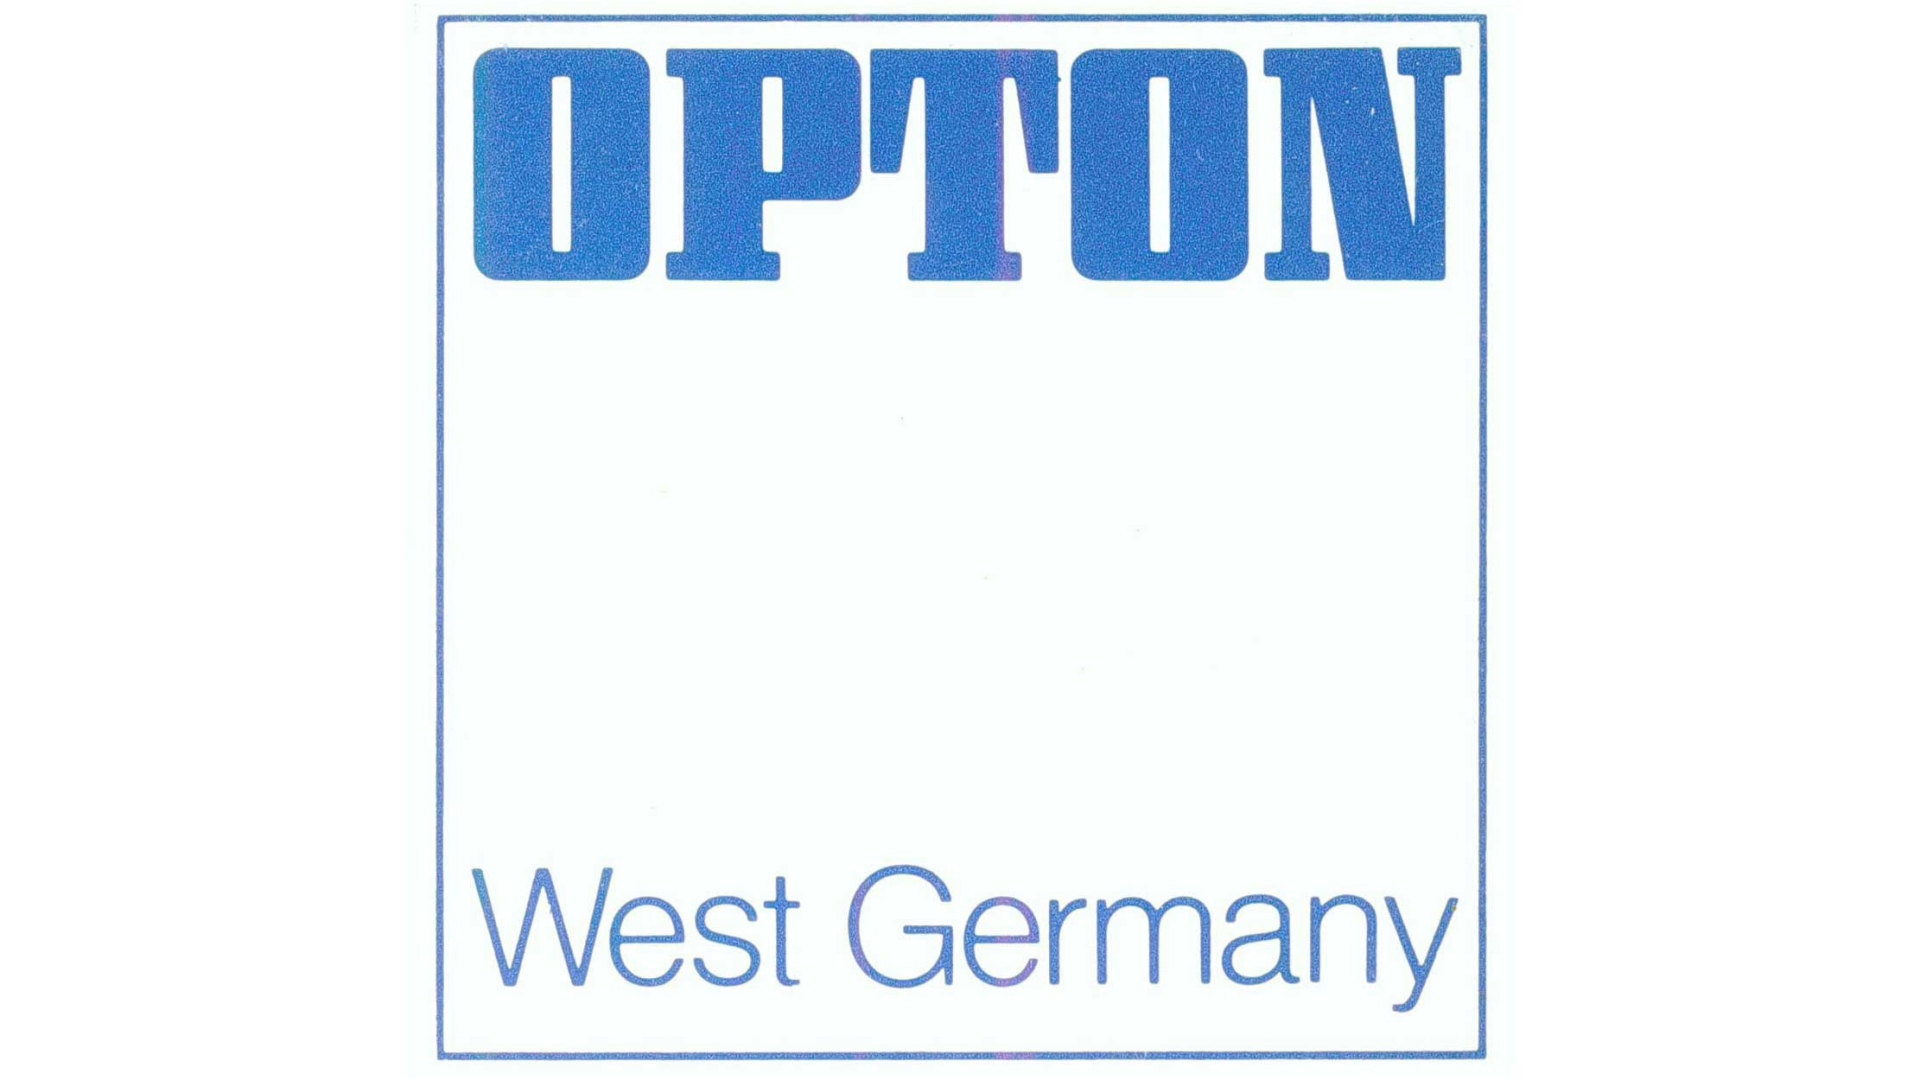 Carl Zeiss, Oberkochen, operated in the East under the name “Opton“.